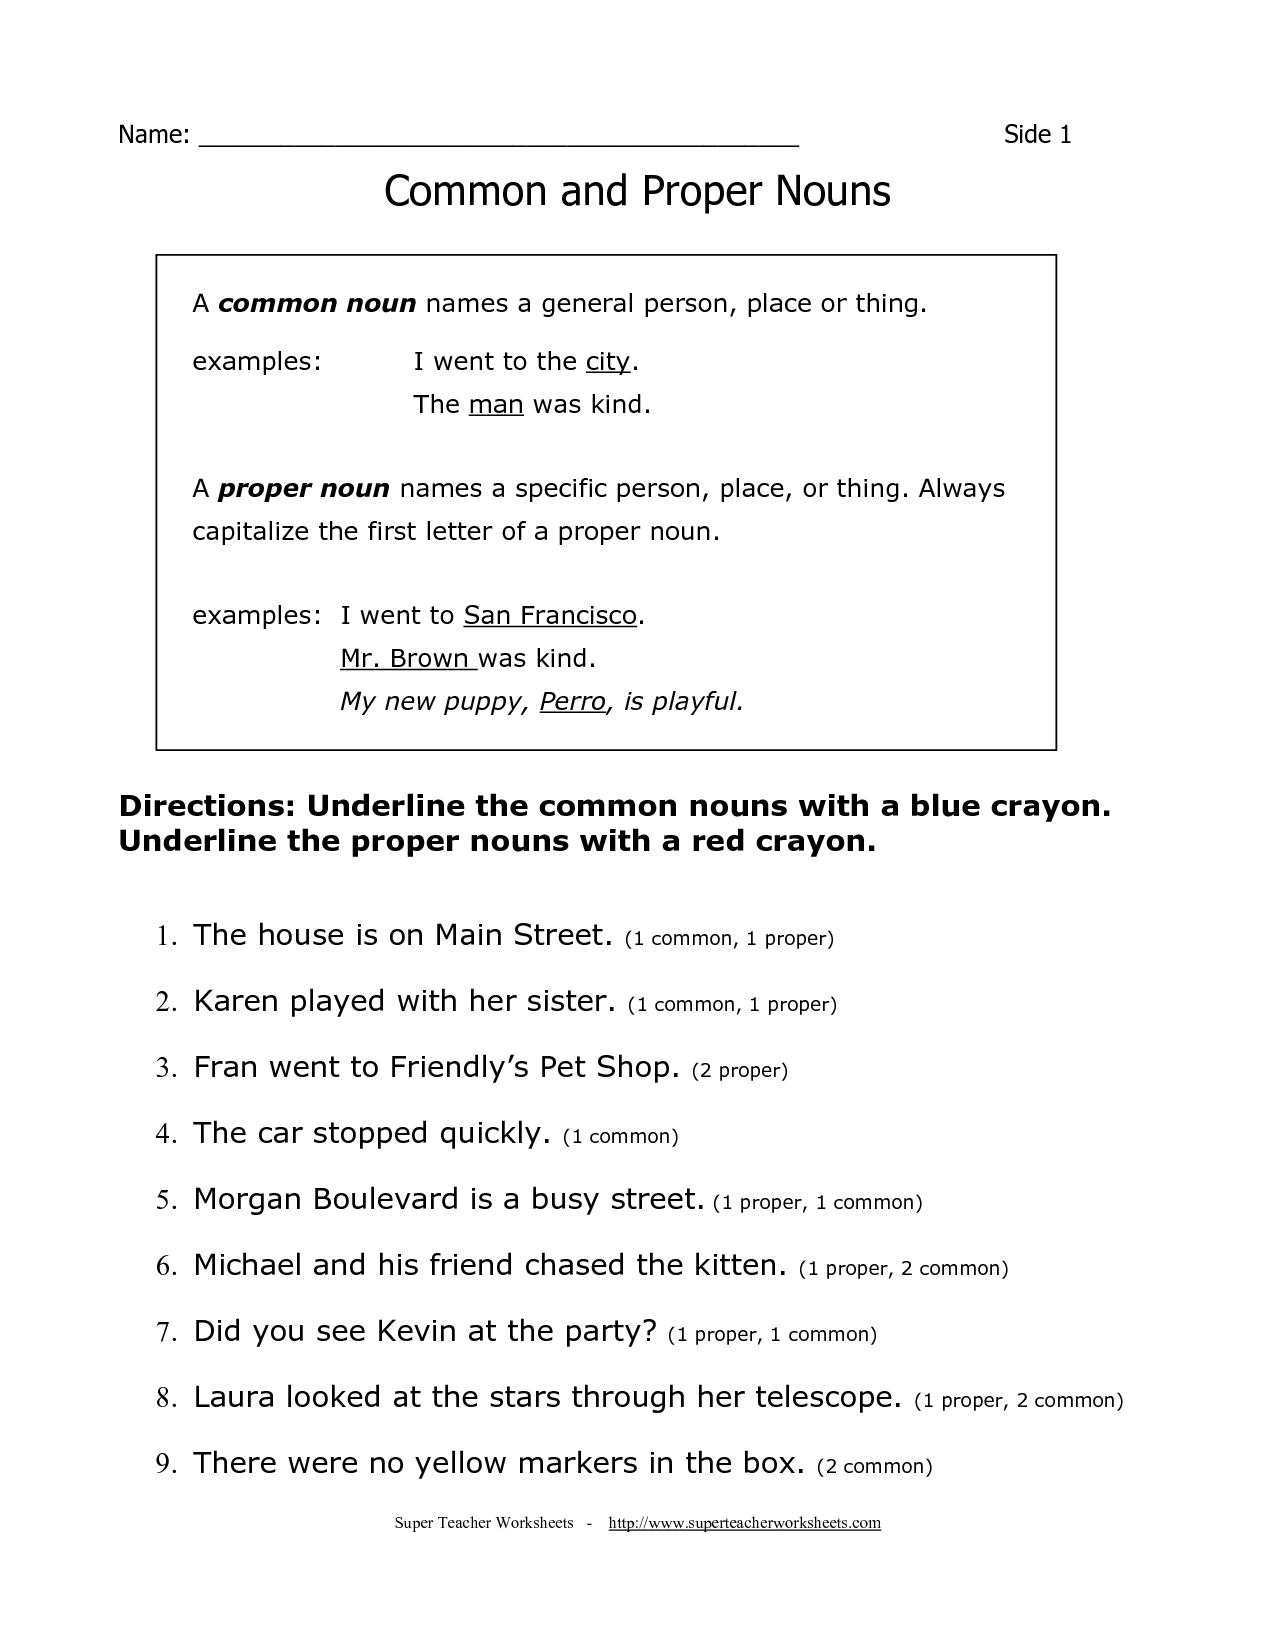 Common and Proper Noun Worksheet First Grade Image